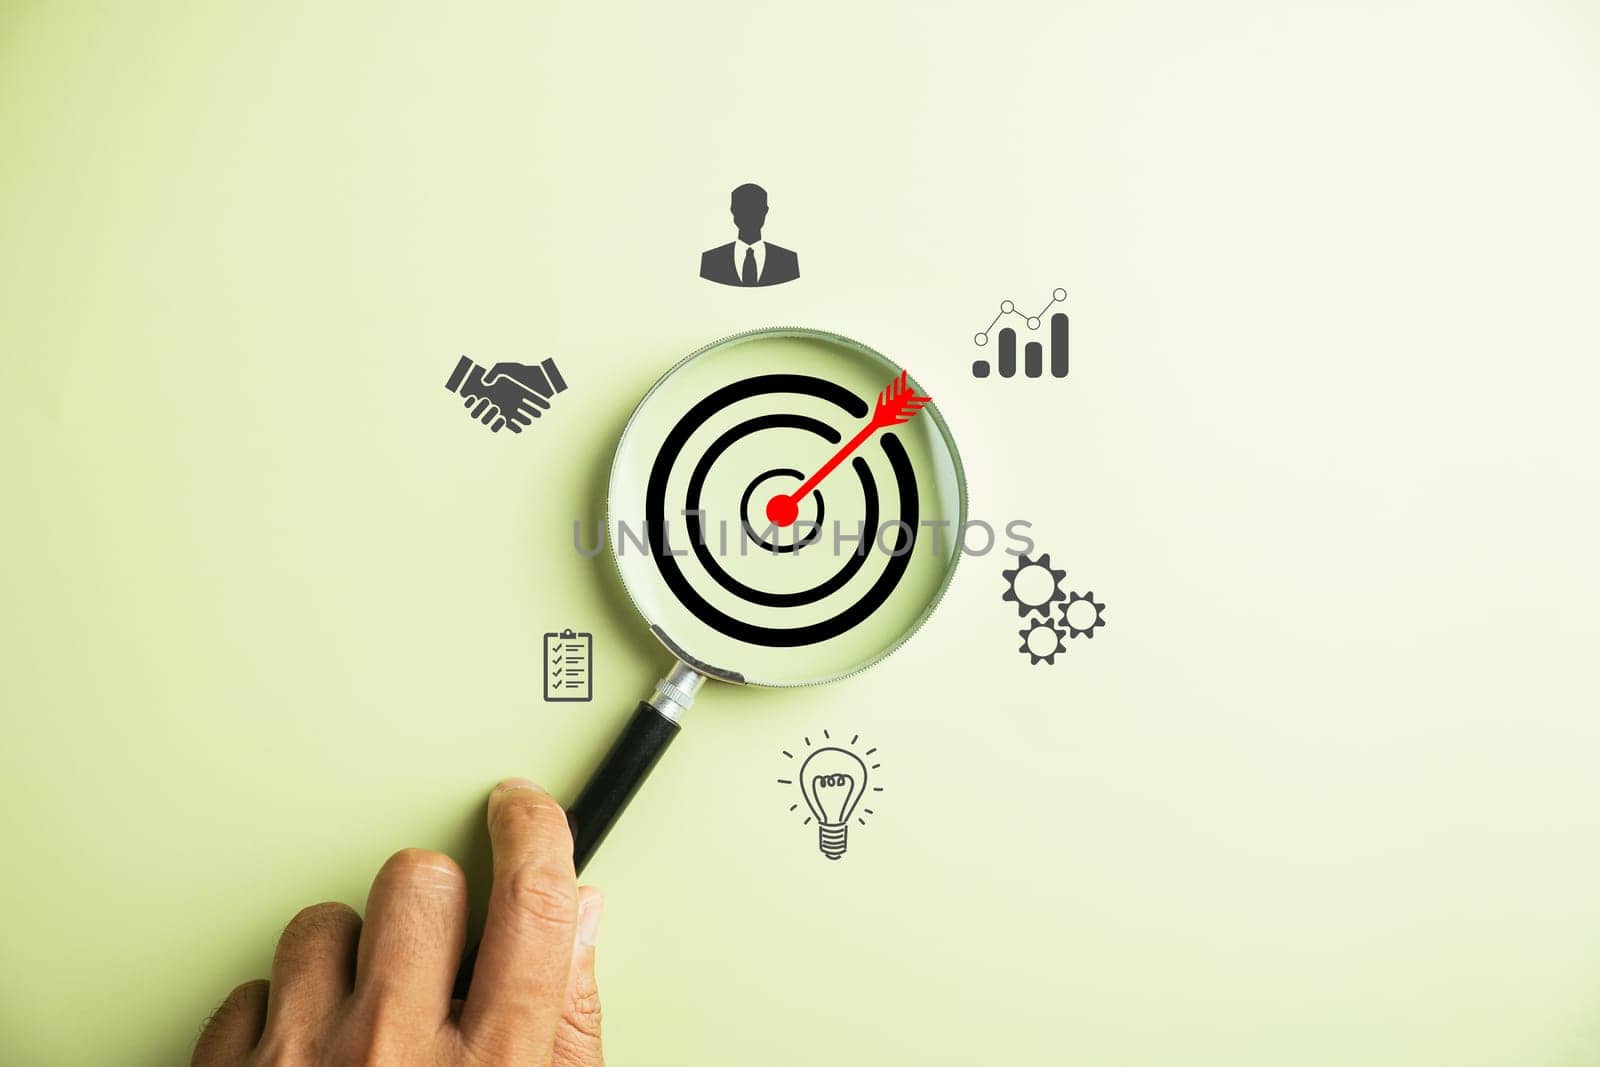 The image showcases a businessman using a magnifying glass to zoom in on the target goal icon, symbolizing the essential strategies for success in business and sustainable goals.